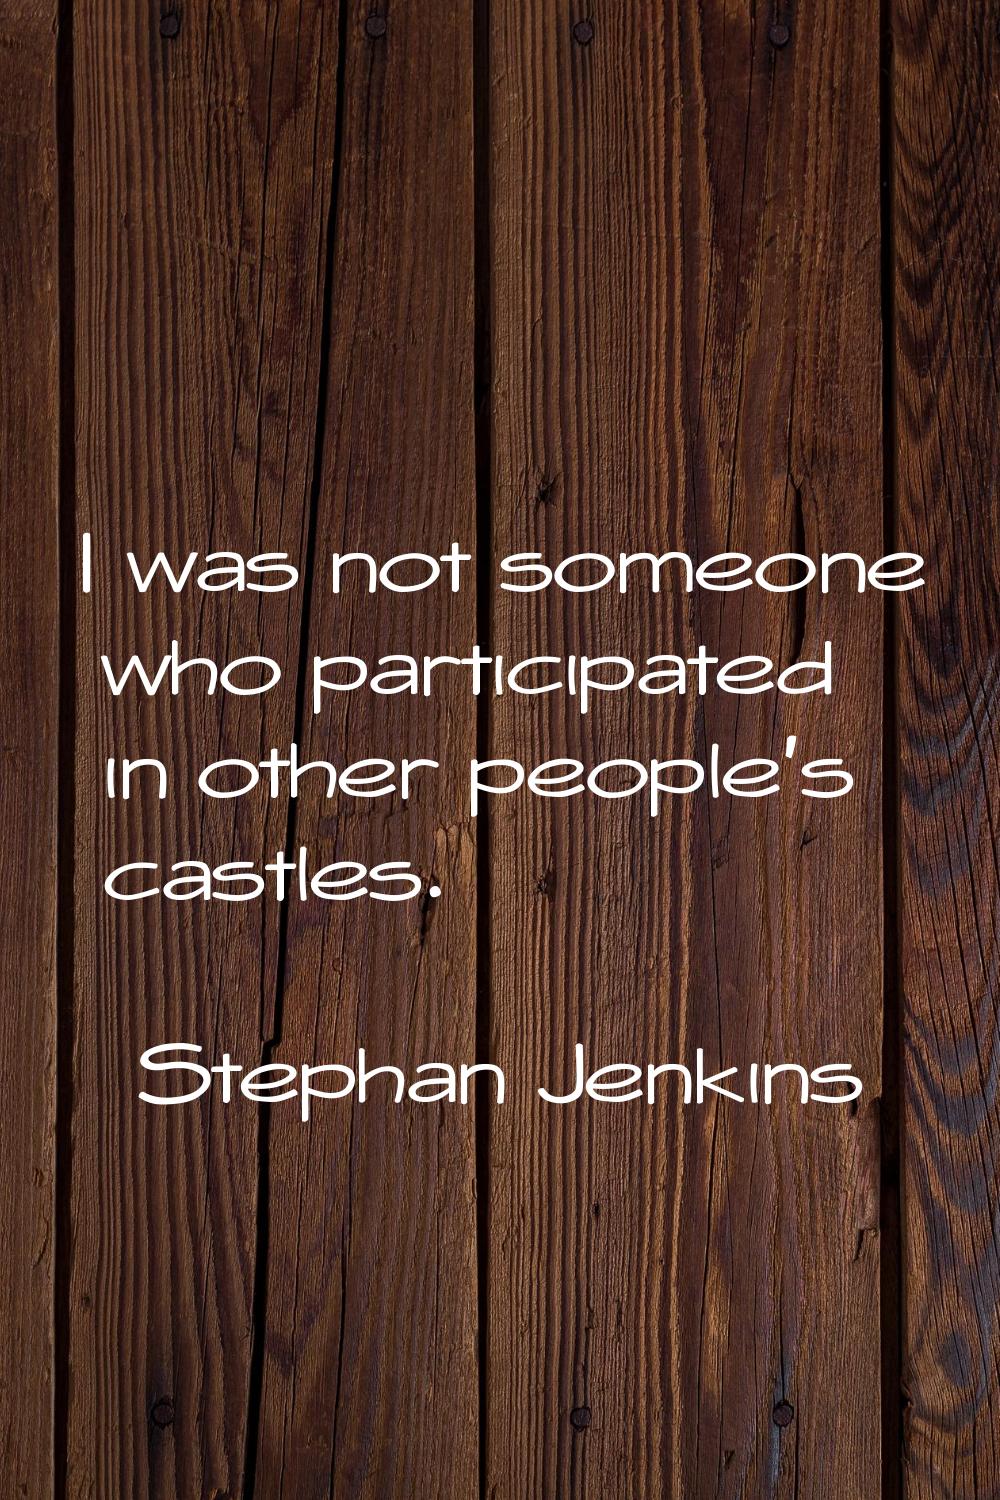 I was not someone who participated in other people's castles.